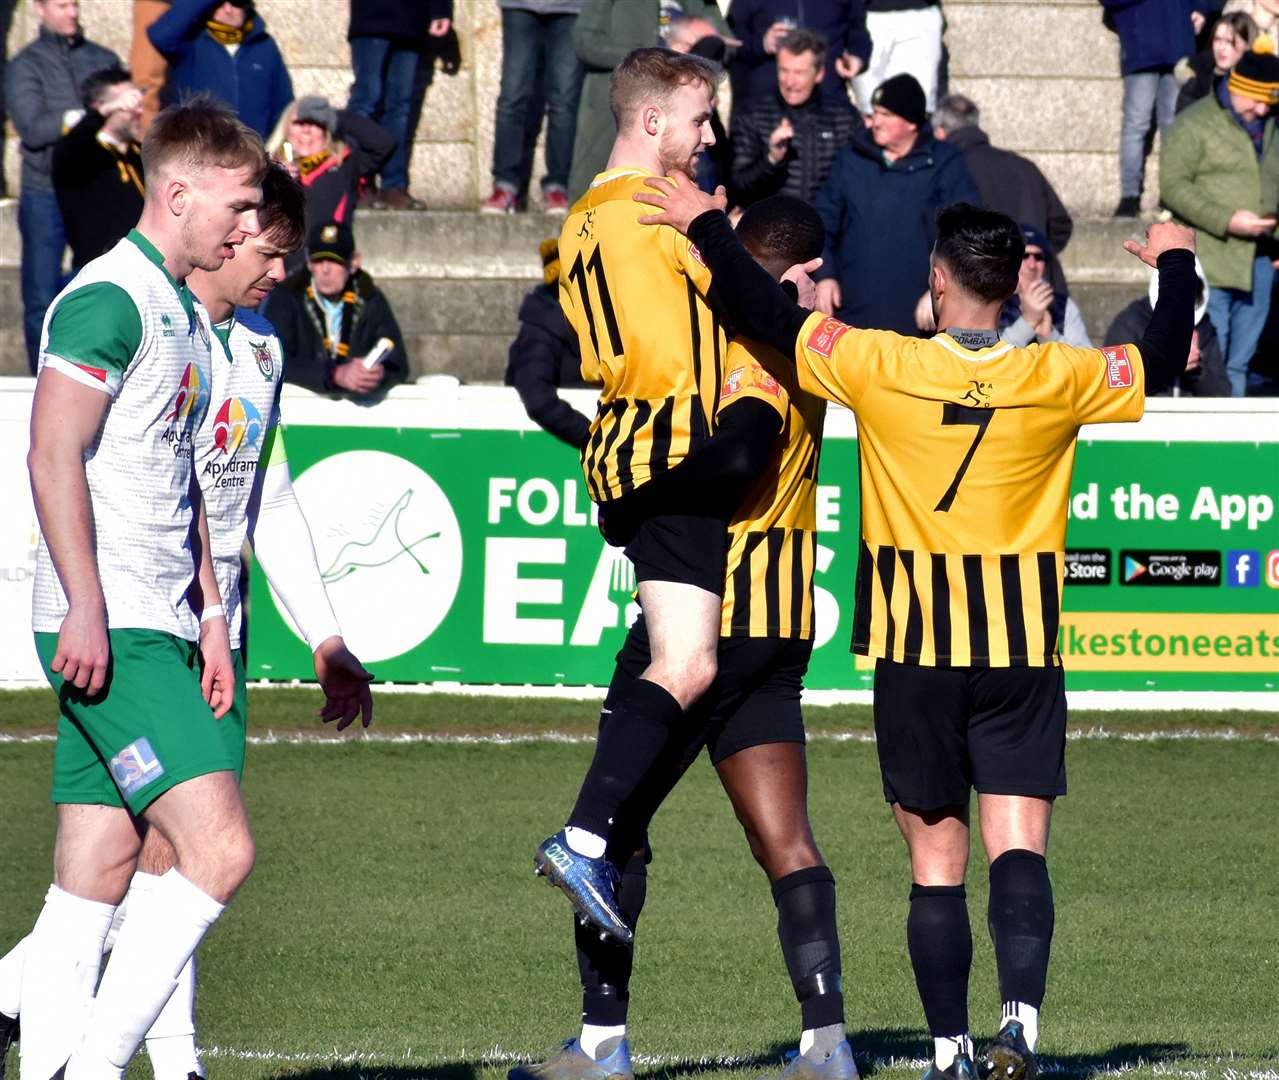 Folkestone celebrate the only goal, scored by Alfie Paxman from the penalty spot, in their weekend win over Bognor Regis. Picture: Randolph File